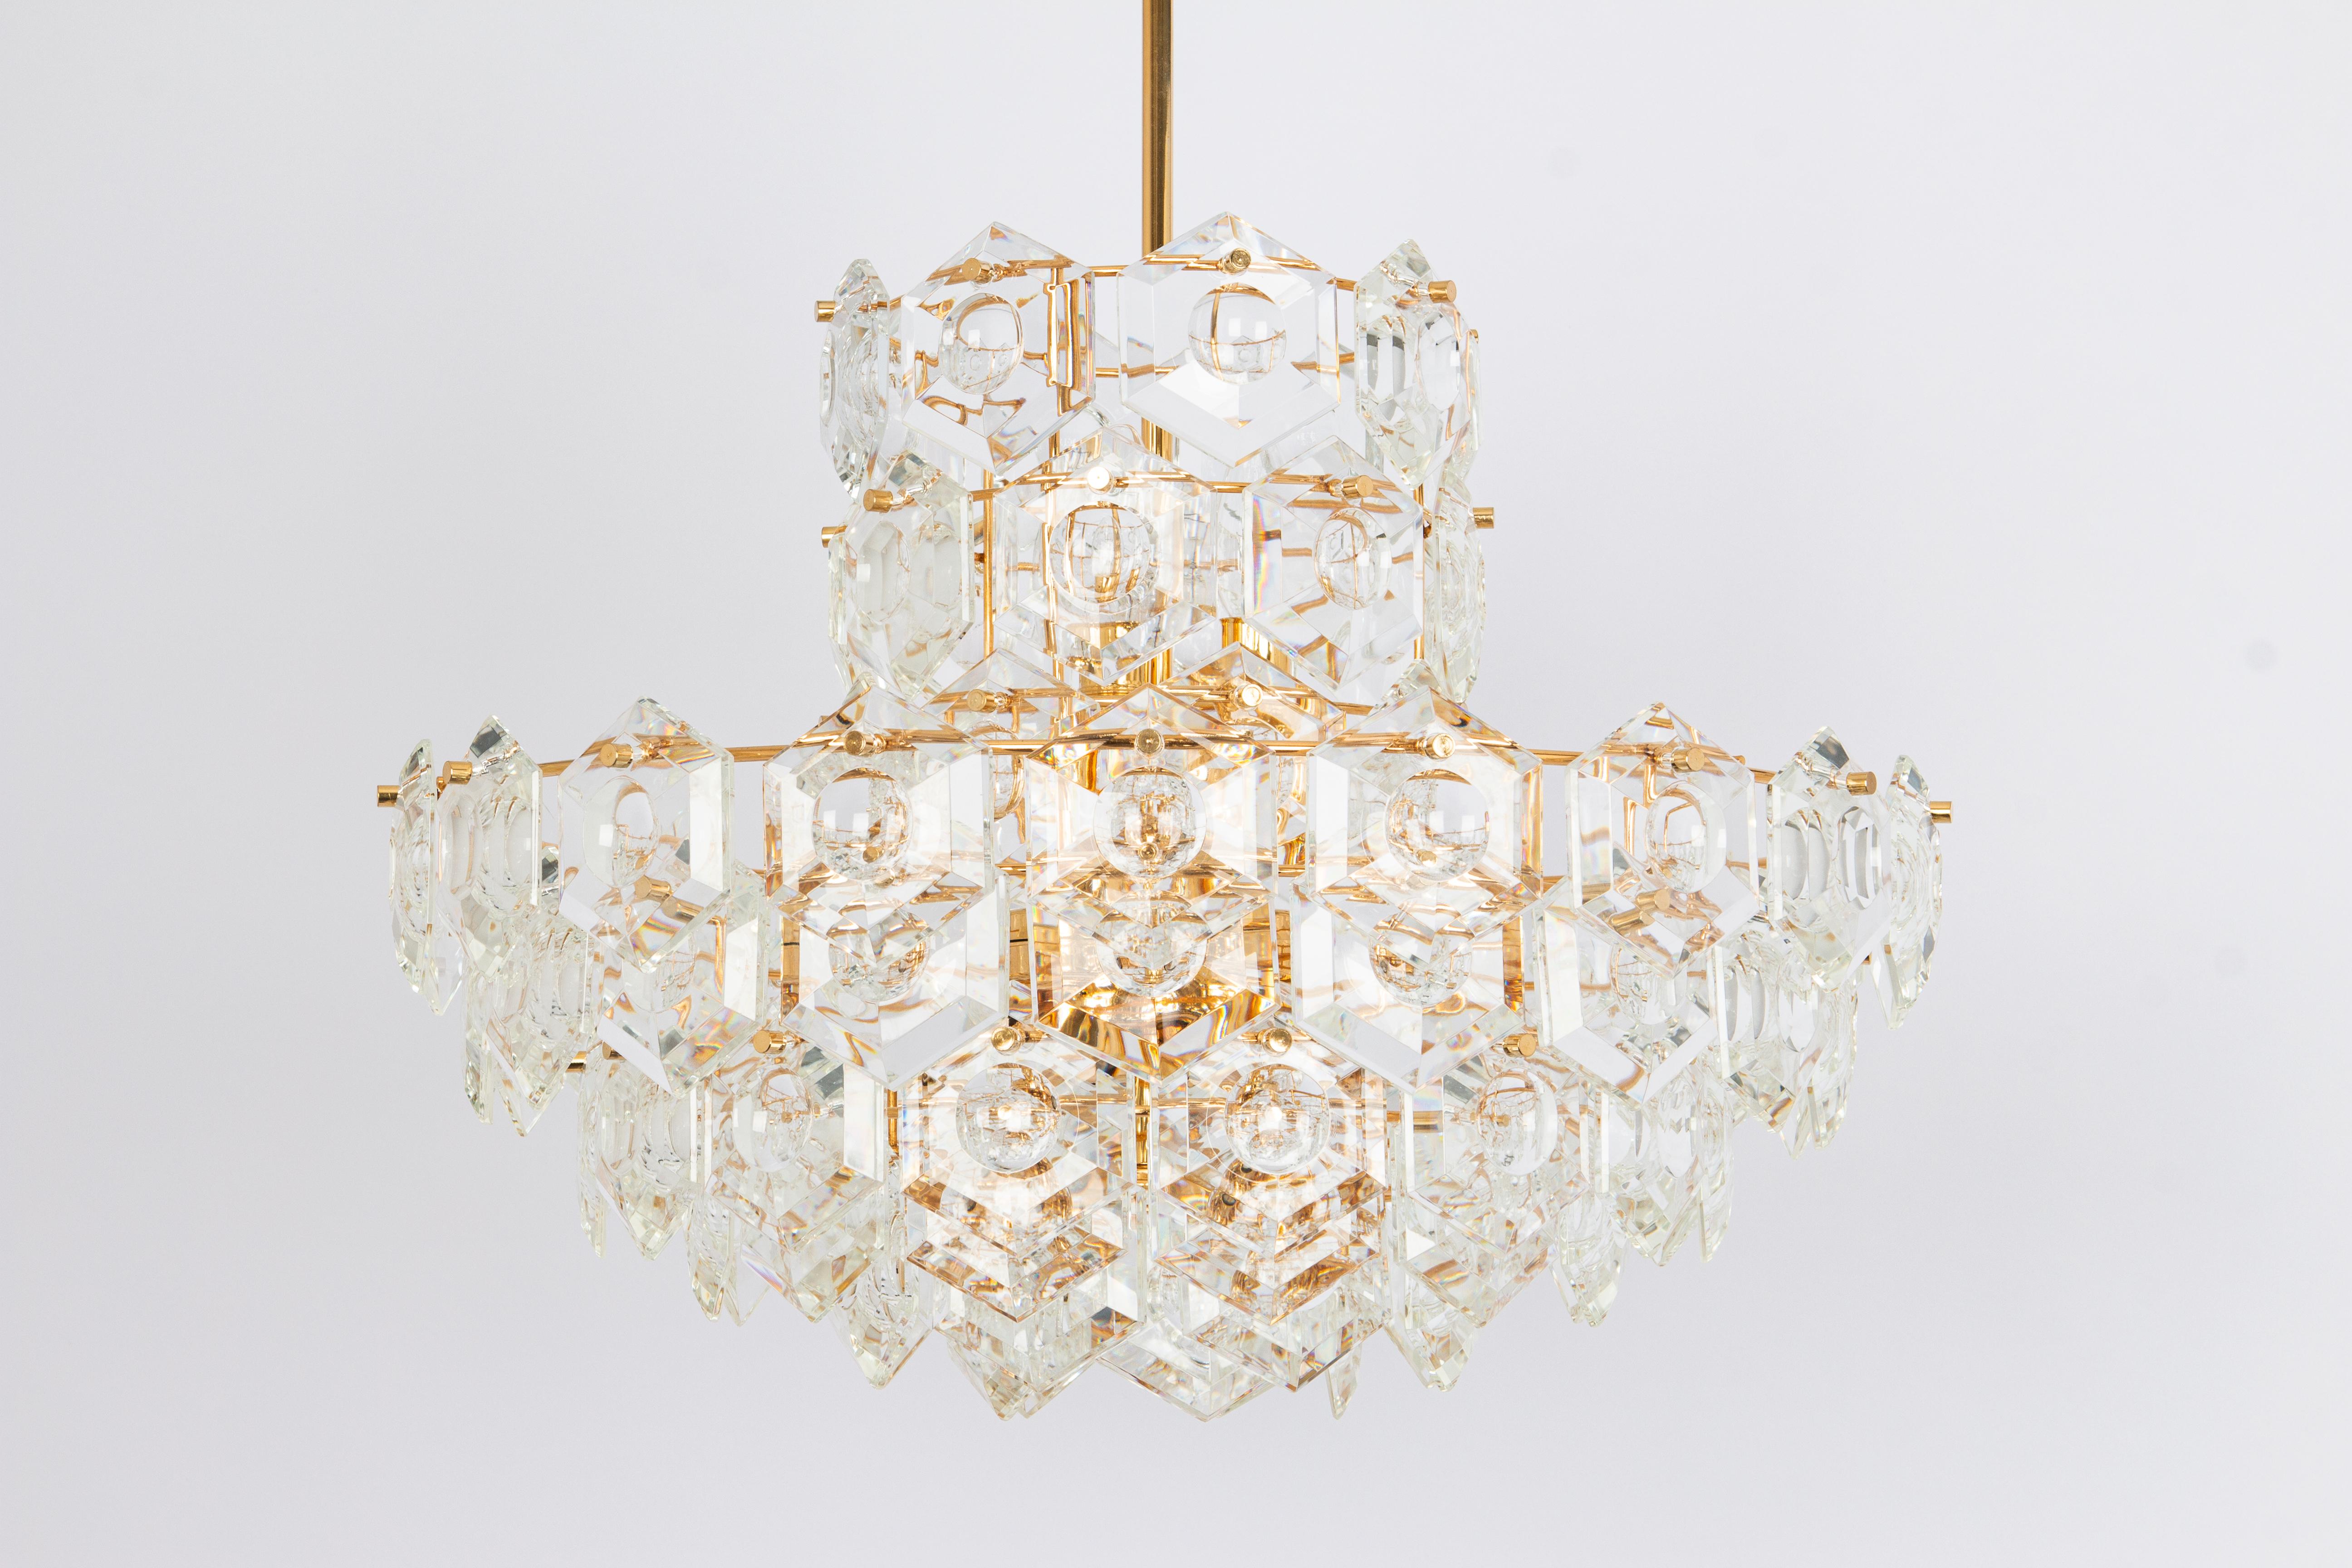 A stunning Nine-tier chandelier by Kinkeldey, Germany, manufactured in circa 1970-1979. A handmade and high-quality piece. The ceiling fixture and the frame are made of brass and has Nine rings with lots of facetted crystal glass elements.
Serie: